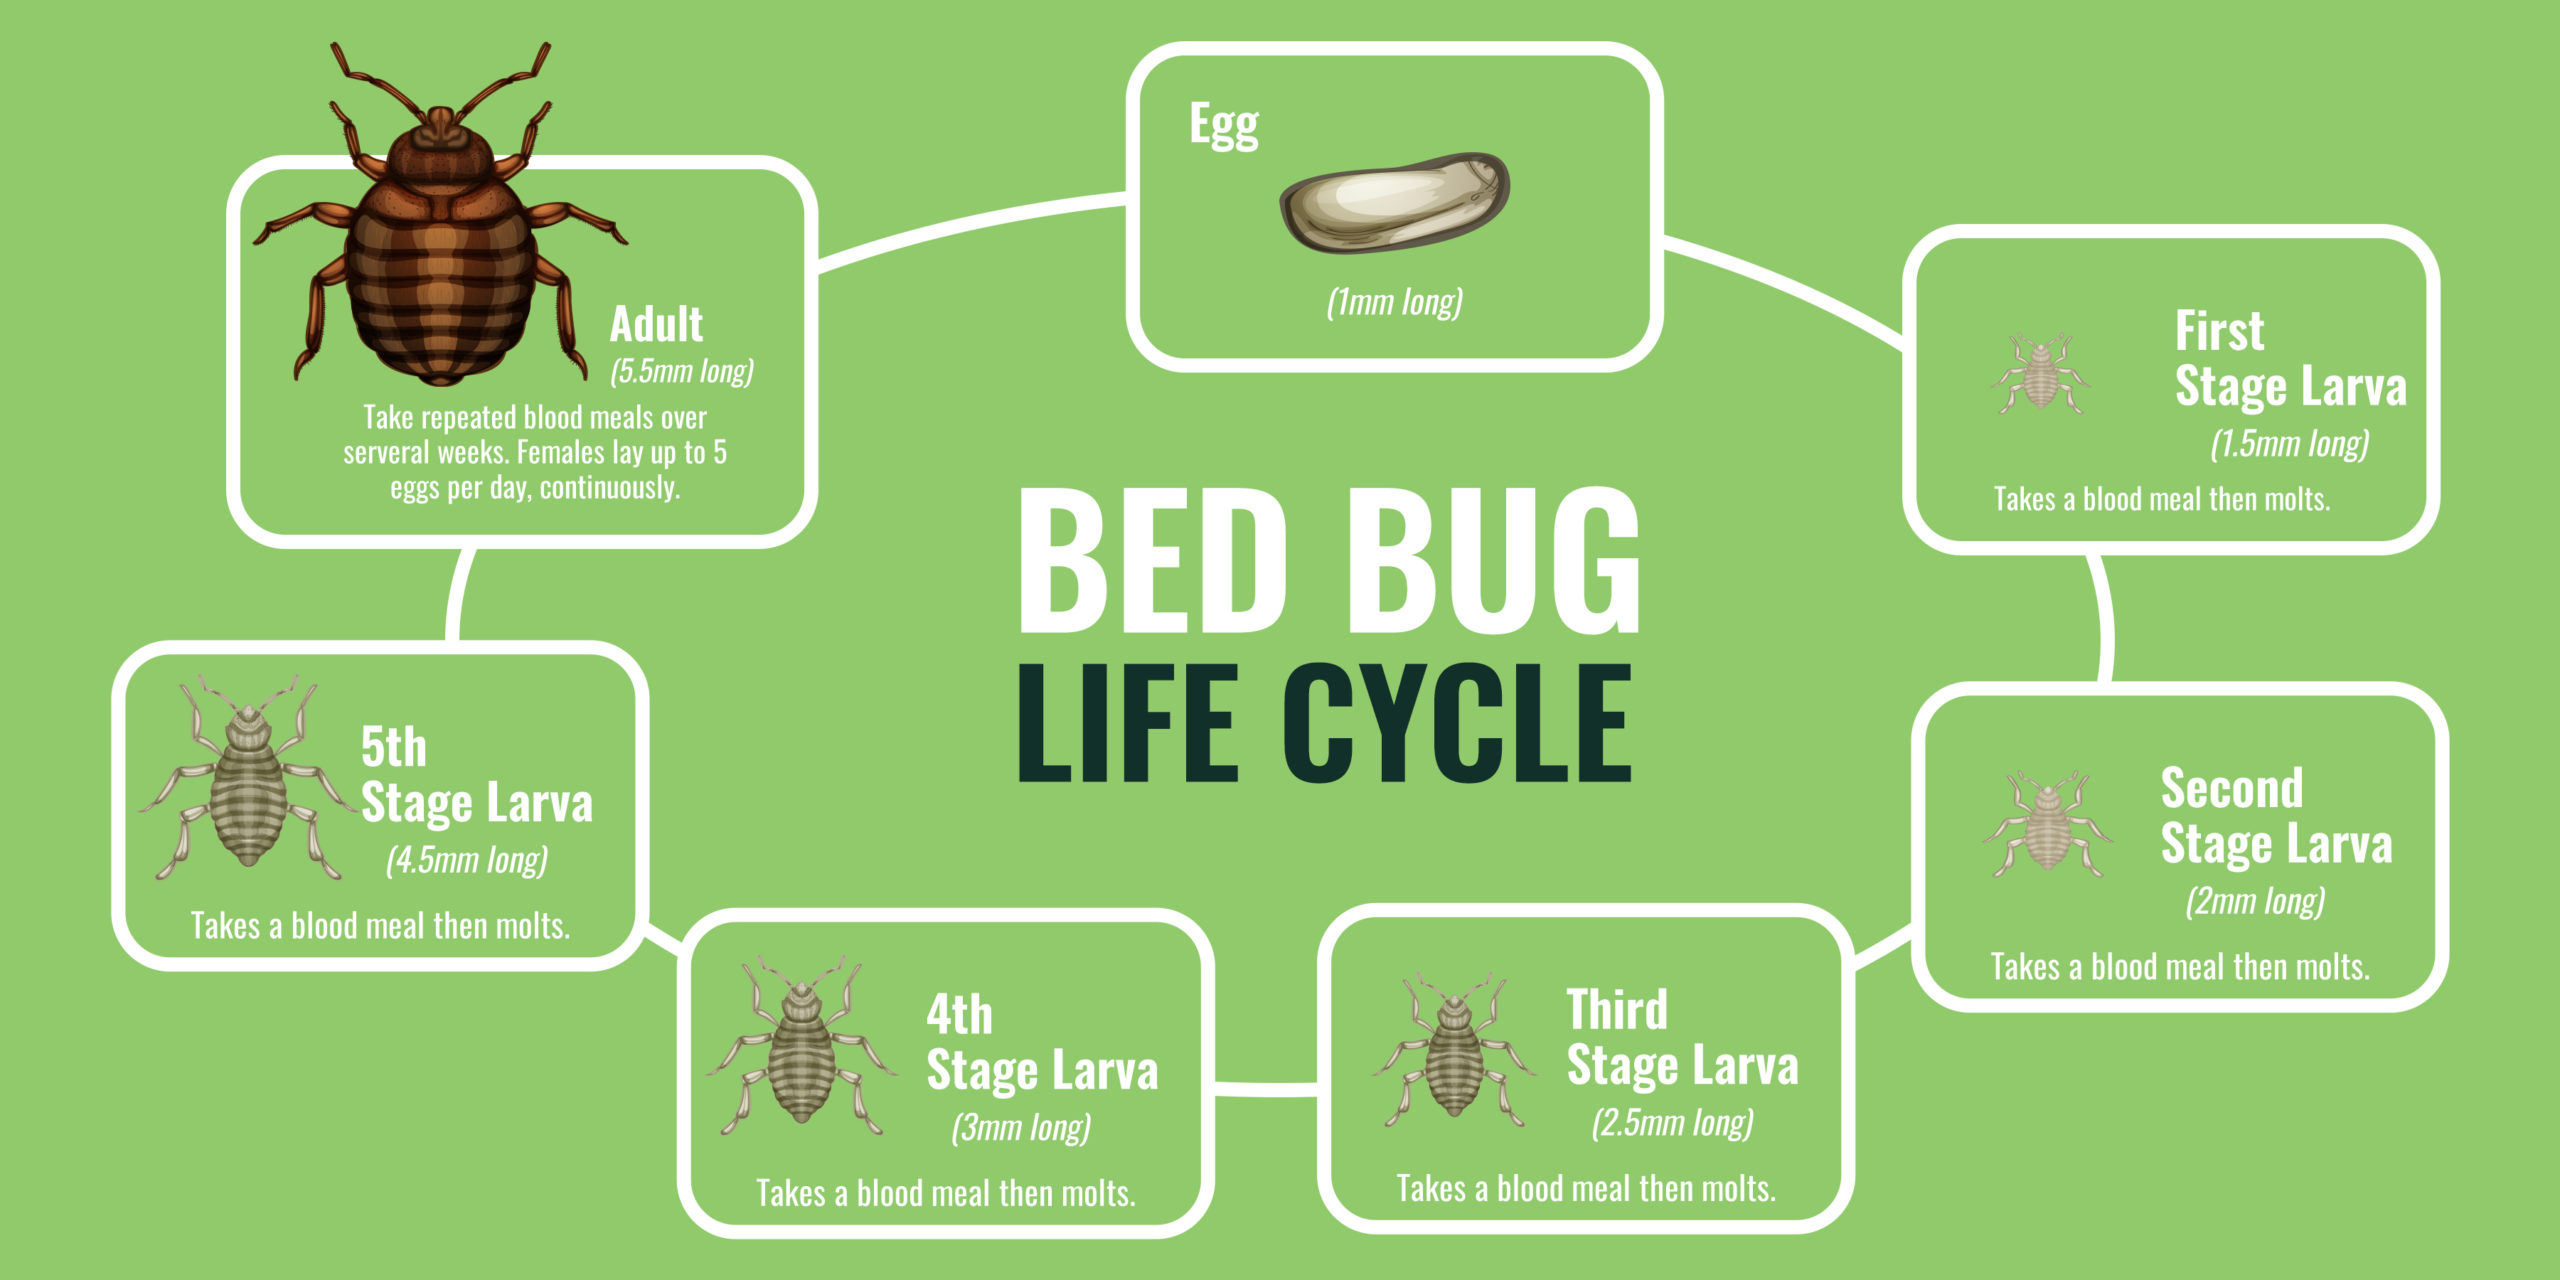 A graphic depicting the life cycle of a bed bug from the egg to the mature adult.